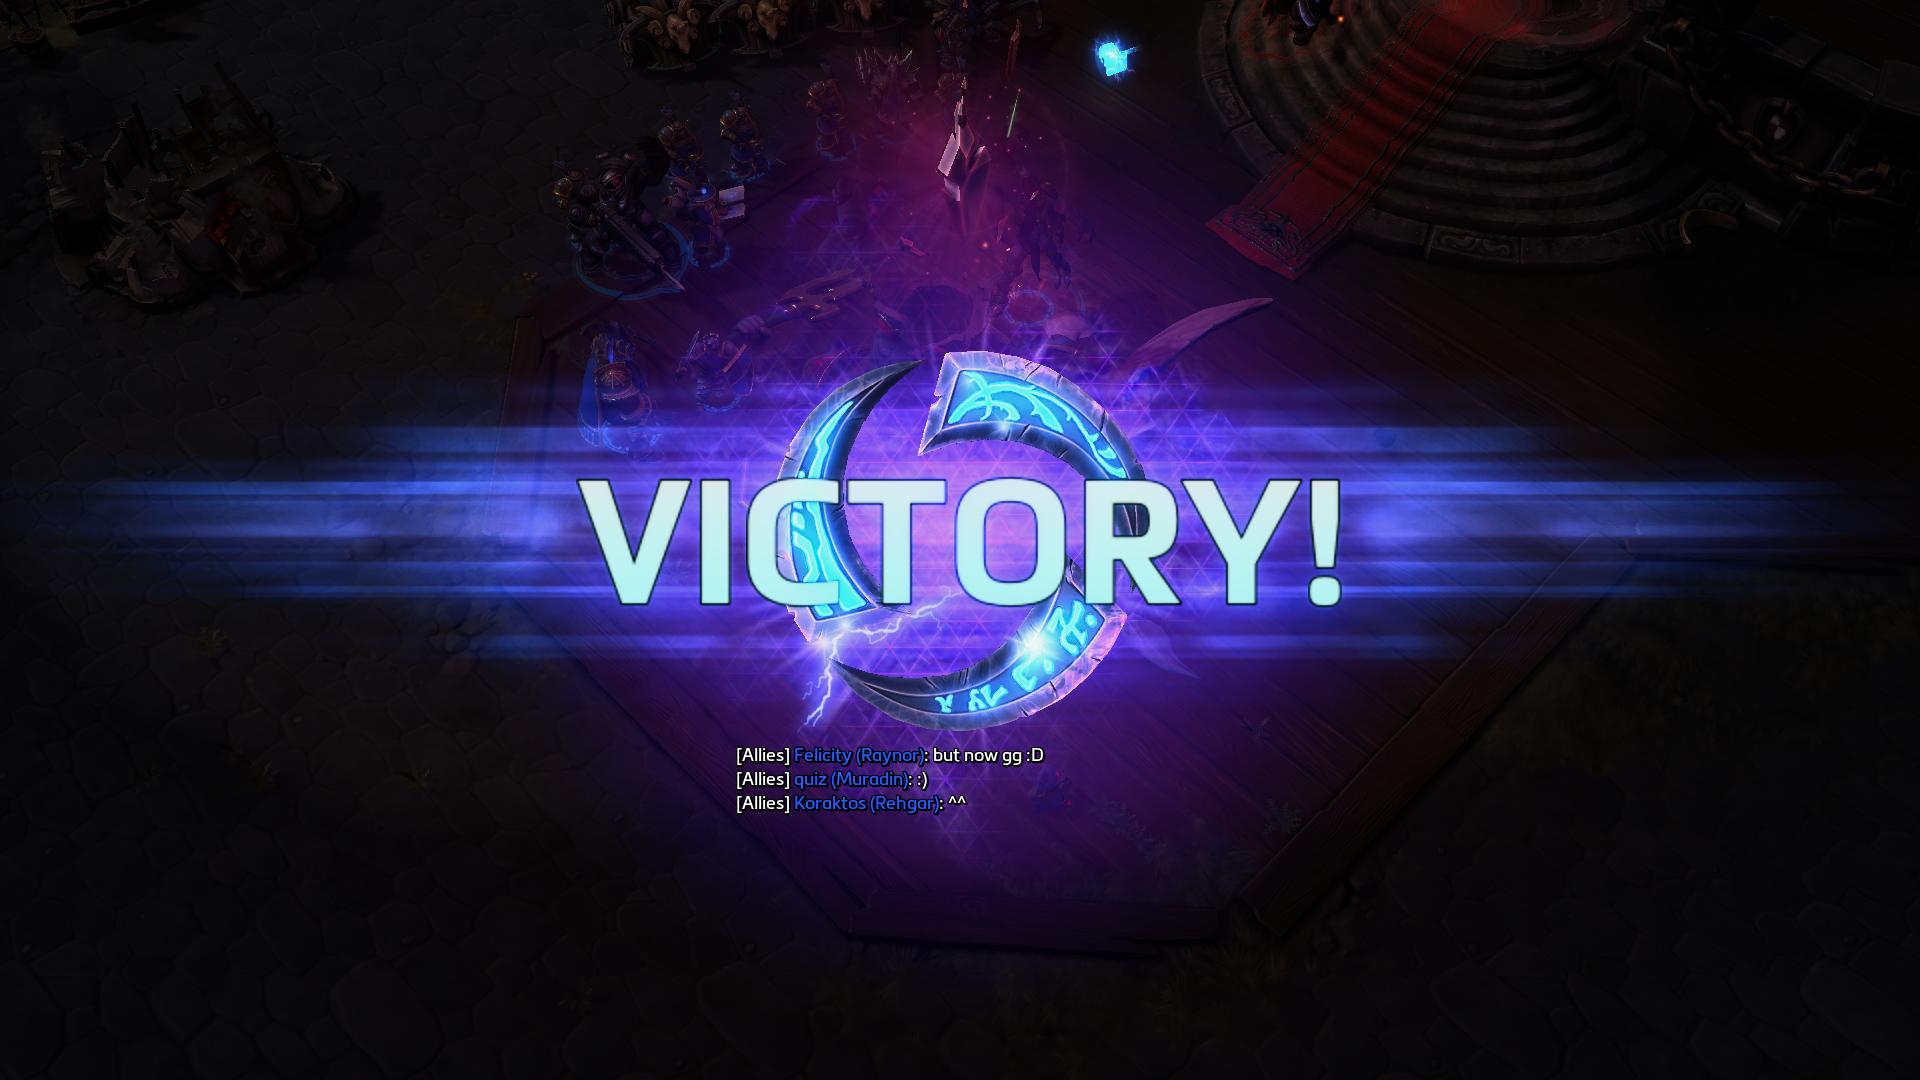 Victory Heroes of the Storm hots screenshot